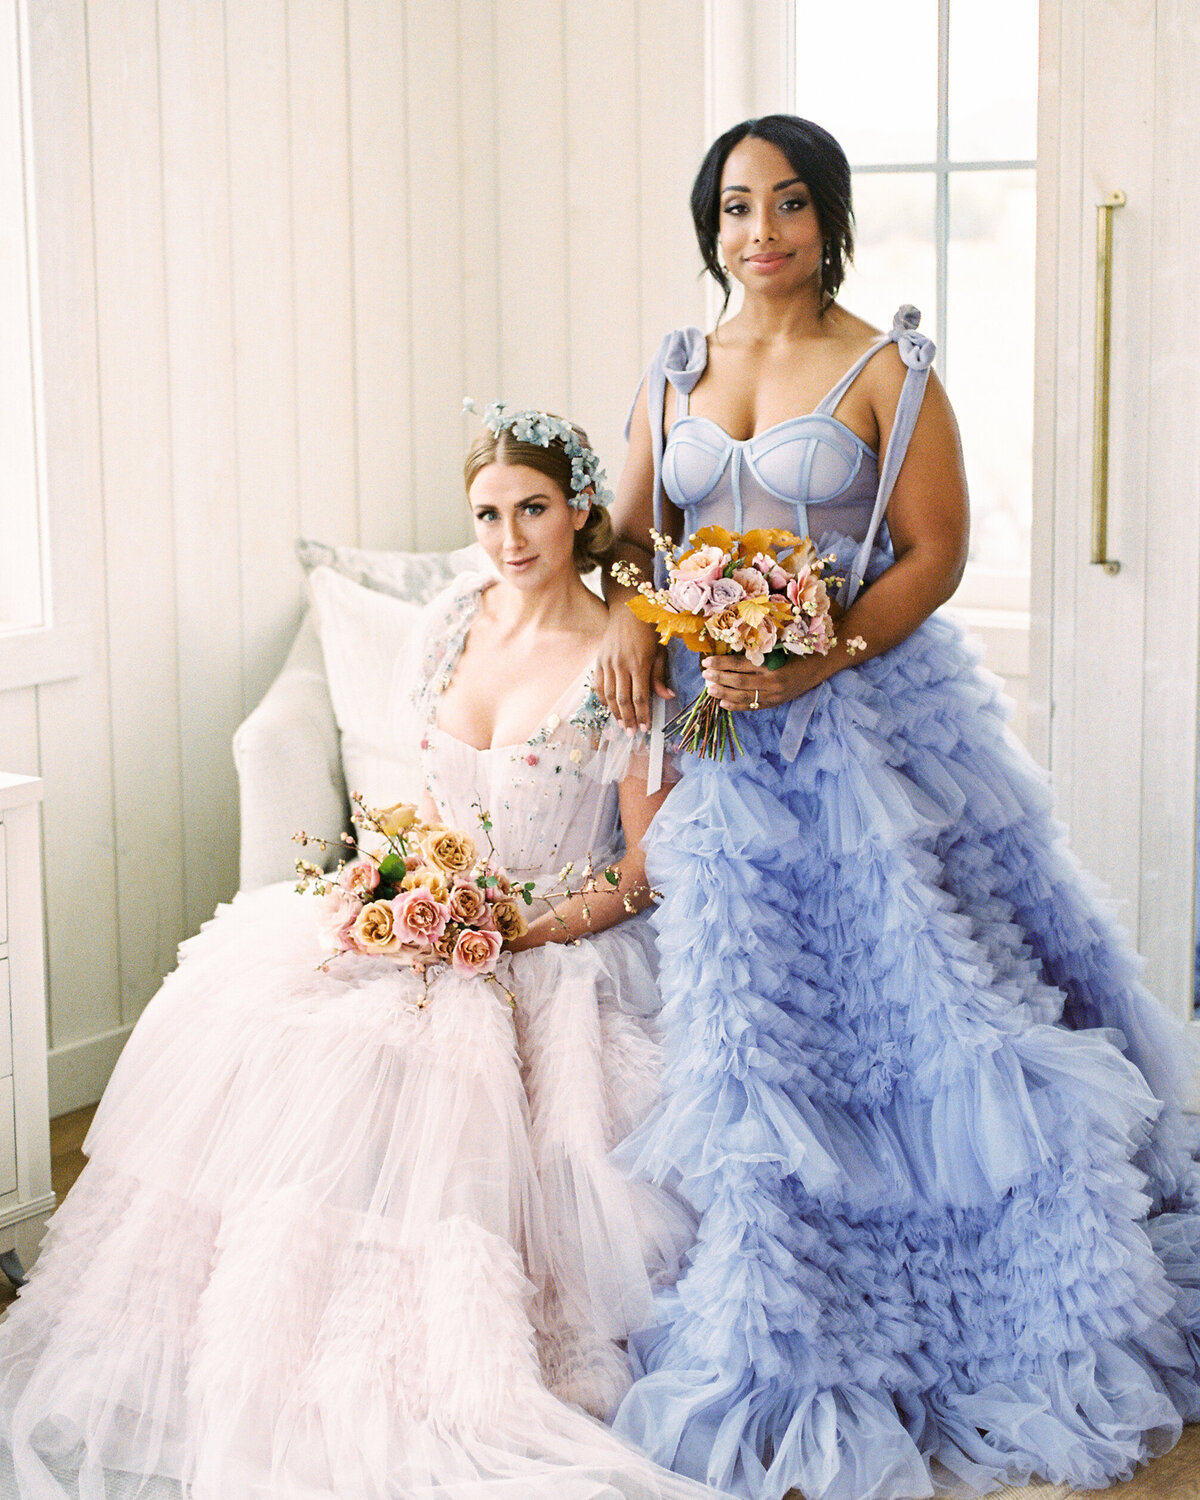 Bride and bridemaid  in colorful dresses